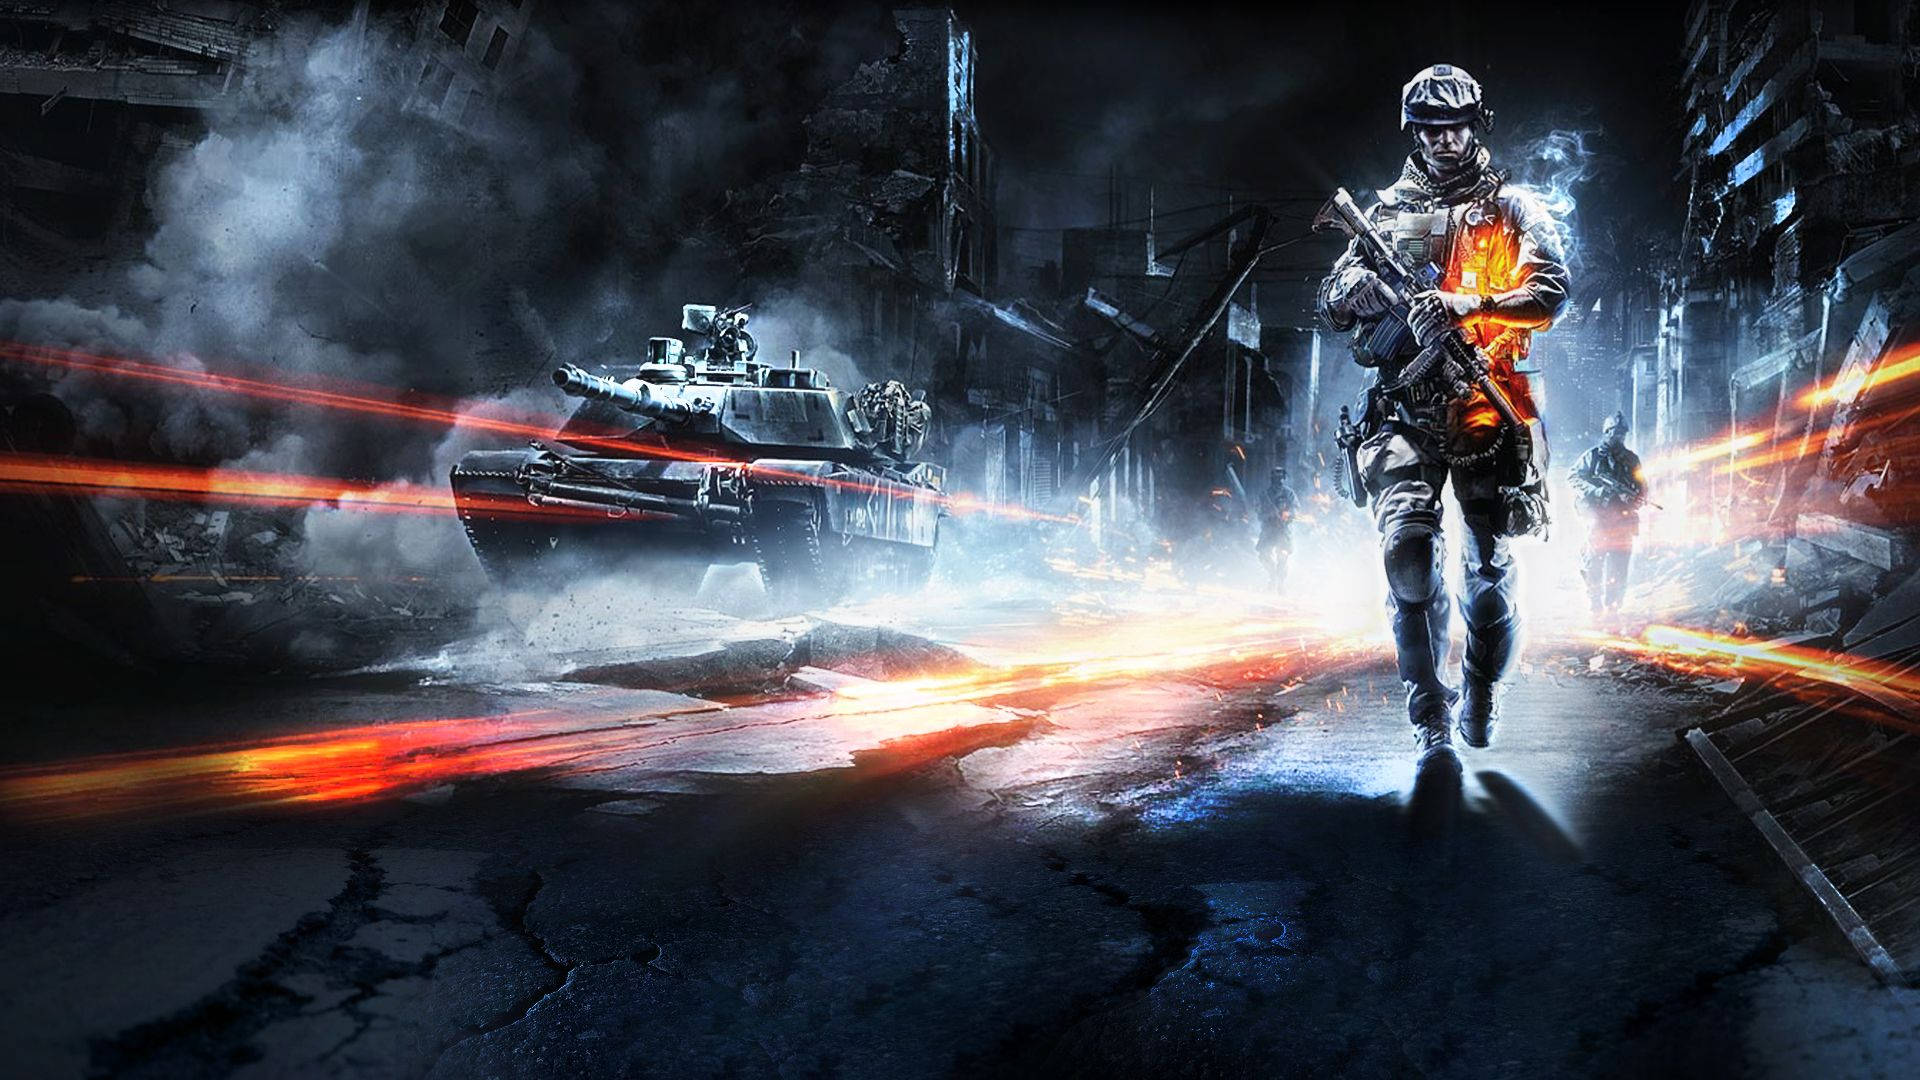 Cool Battlefield 3 Video Game Wrecked Road Wallpaper